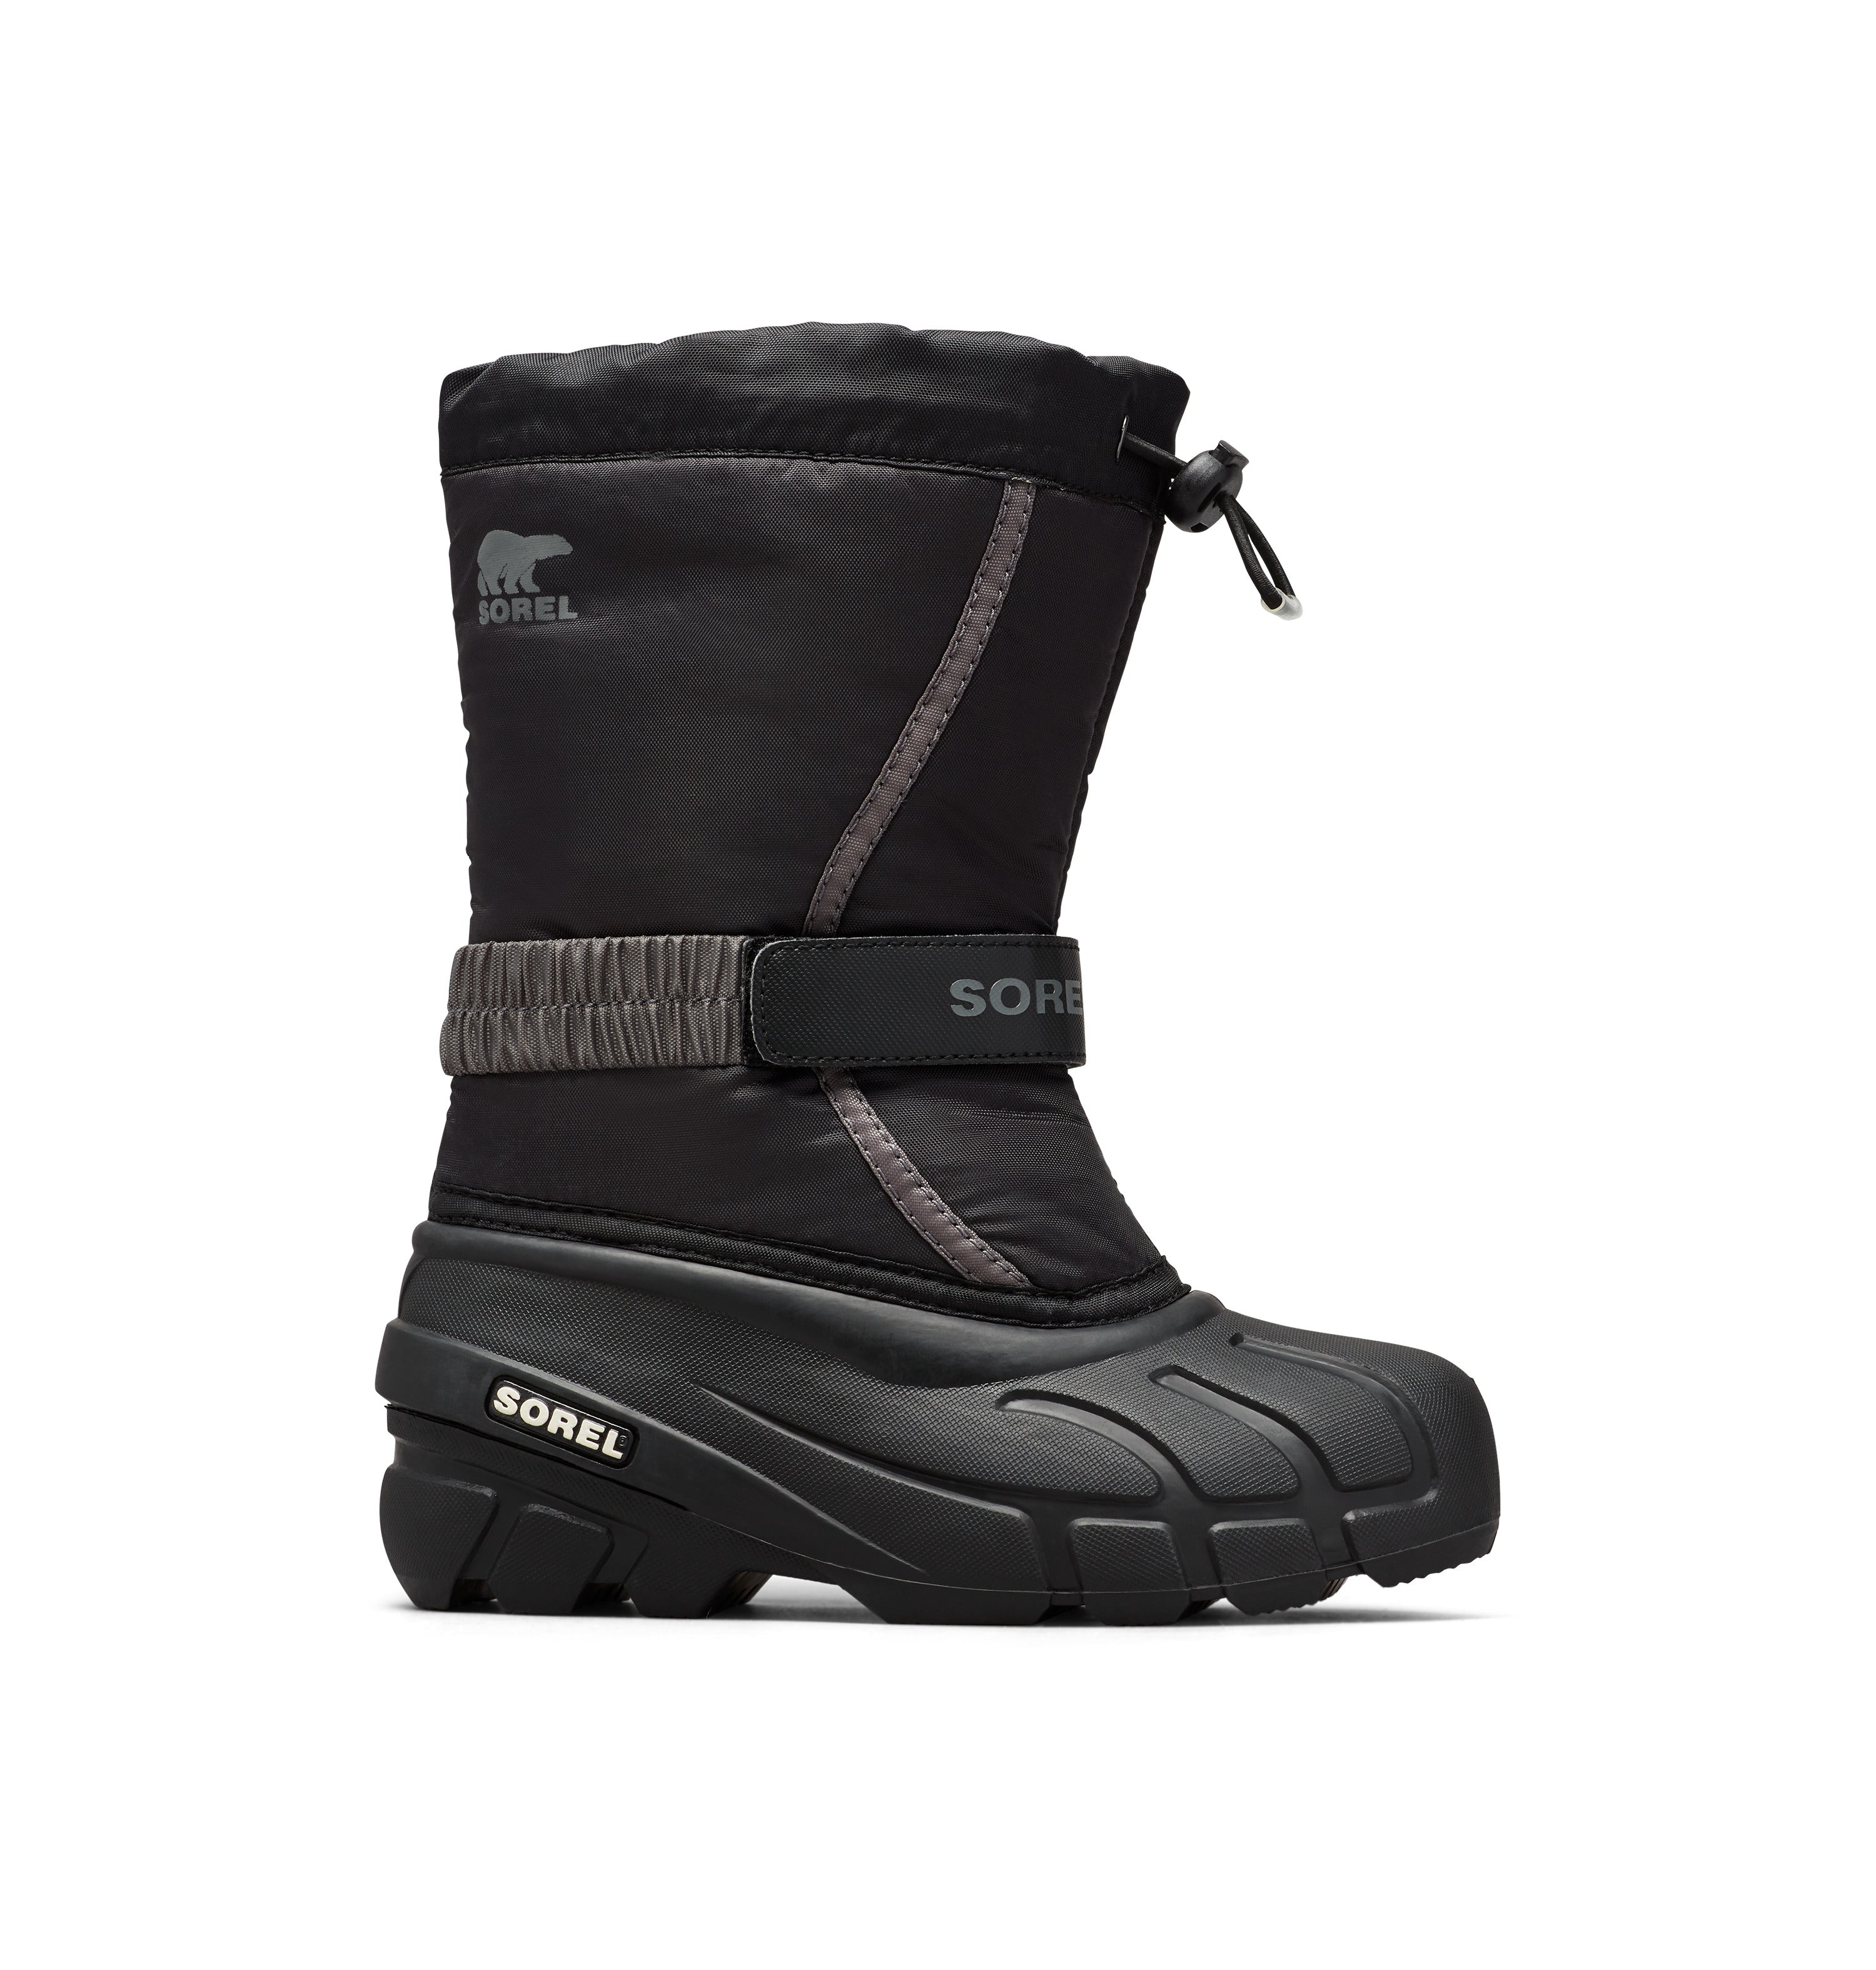 Flurry Kid's Insulated Snow Boot - Black/City Grey